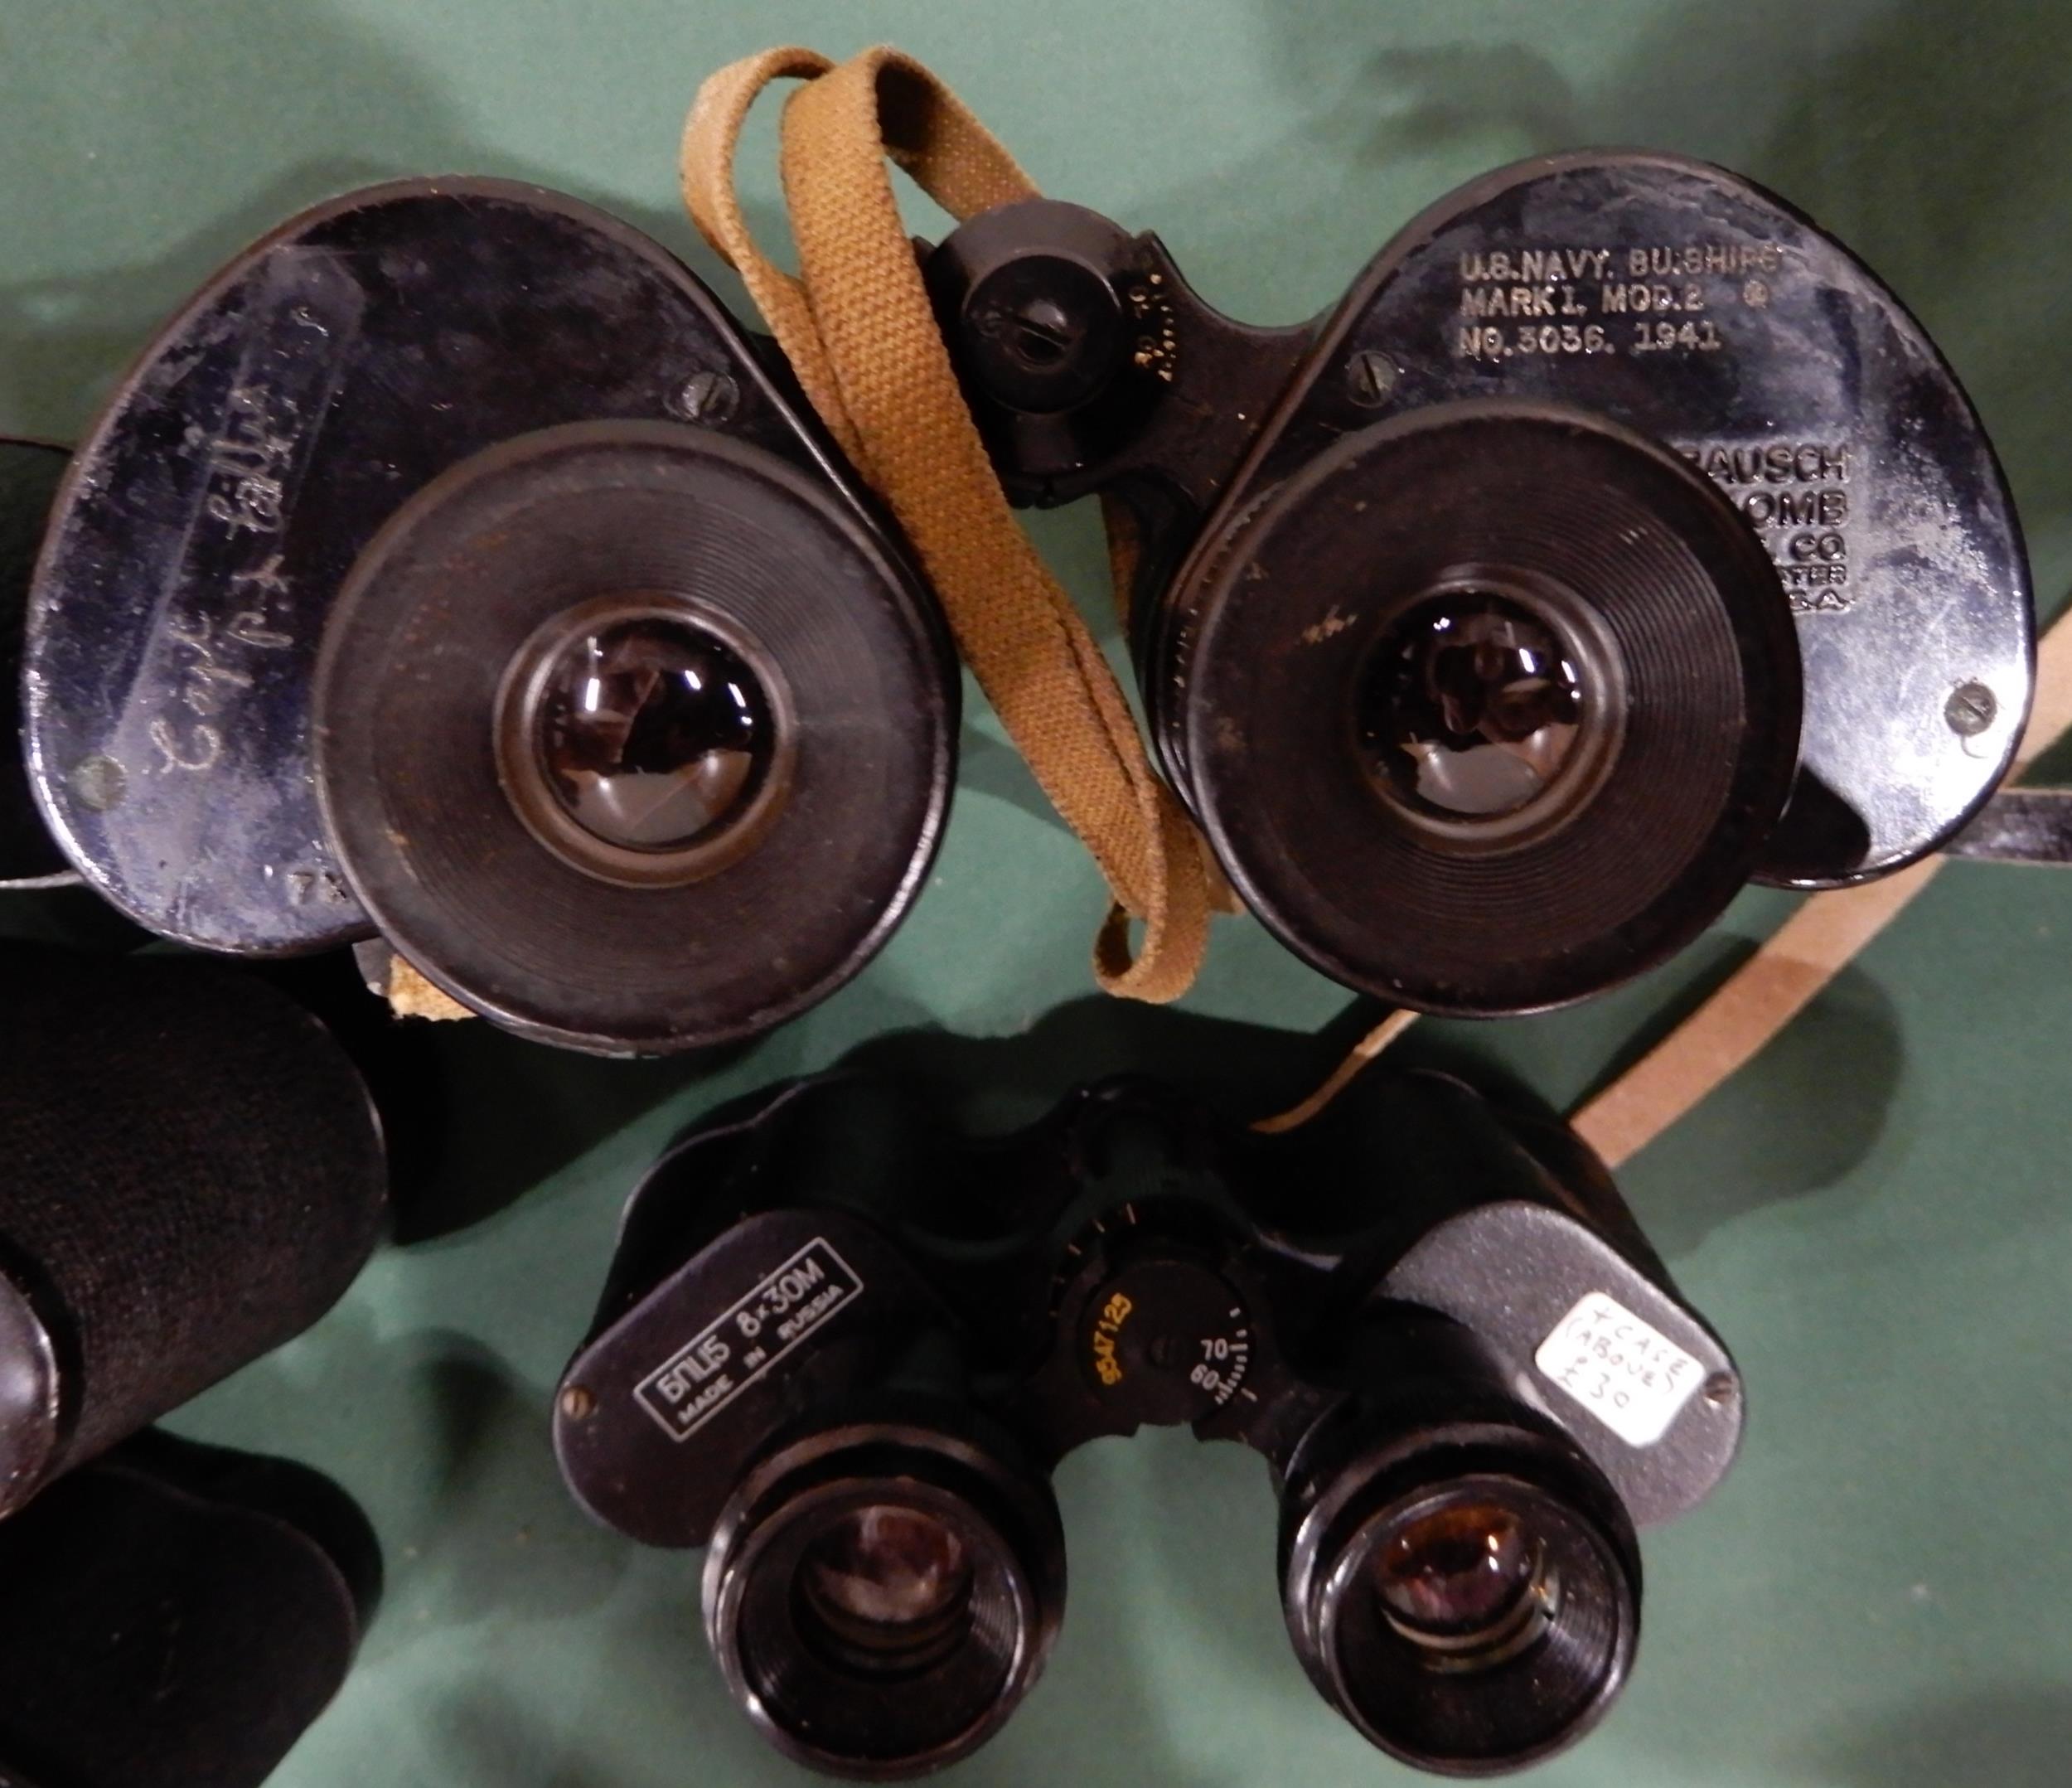 A quantity of binoculars with various makers and models with Nikon, Pentax, E. Leitz, Carl Zeiss, - Image 8 of 19